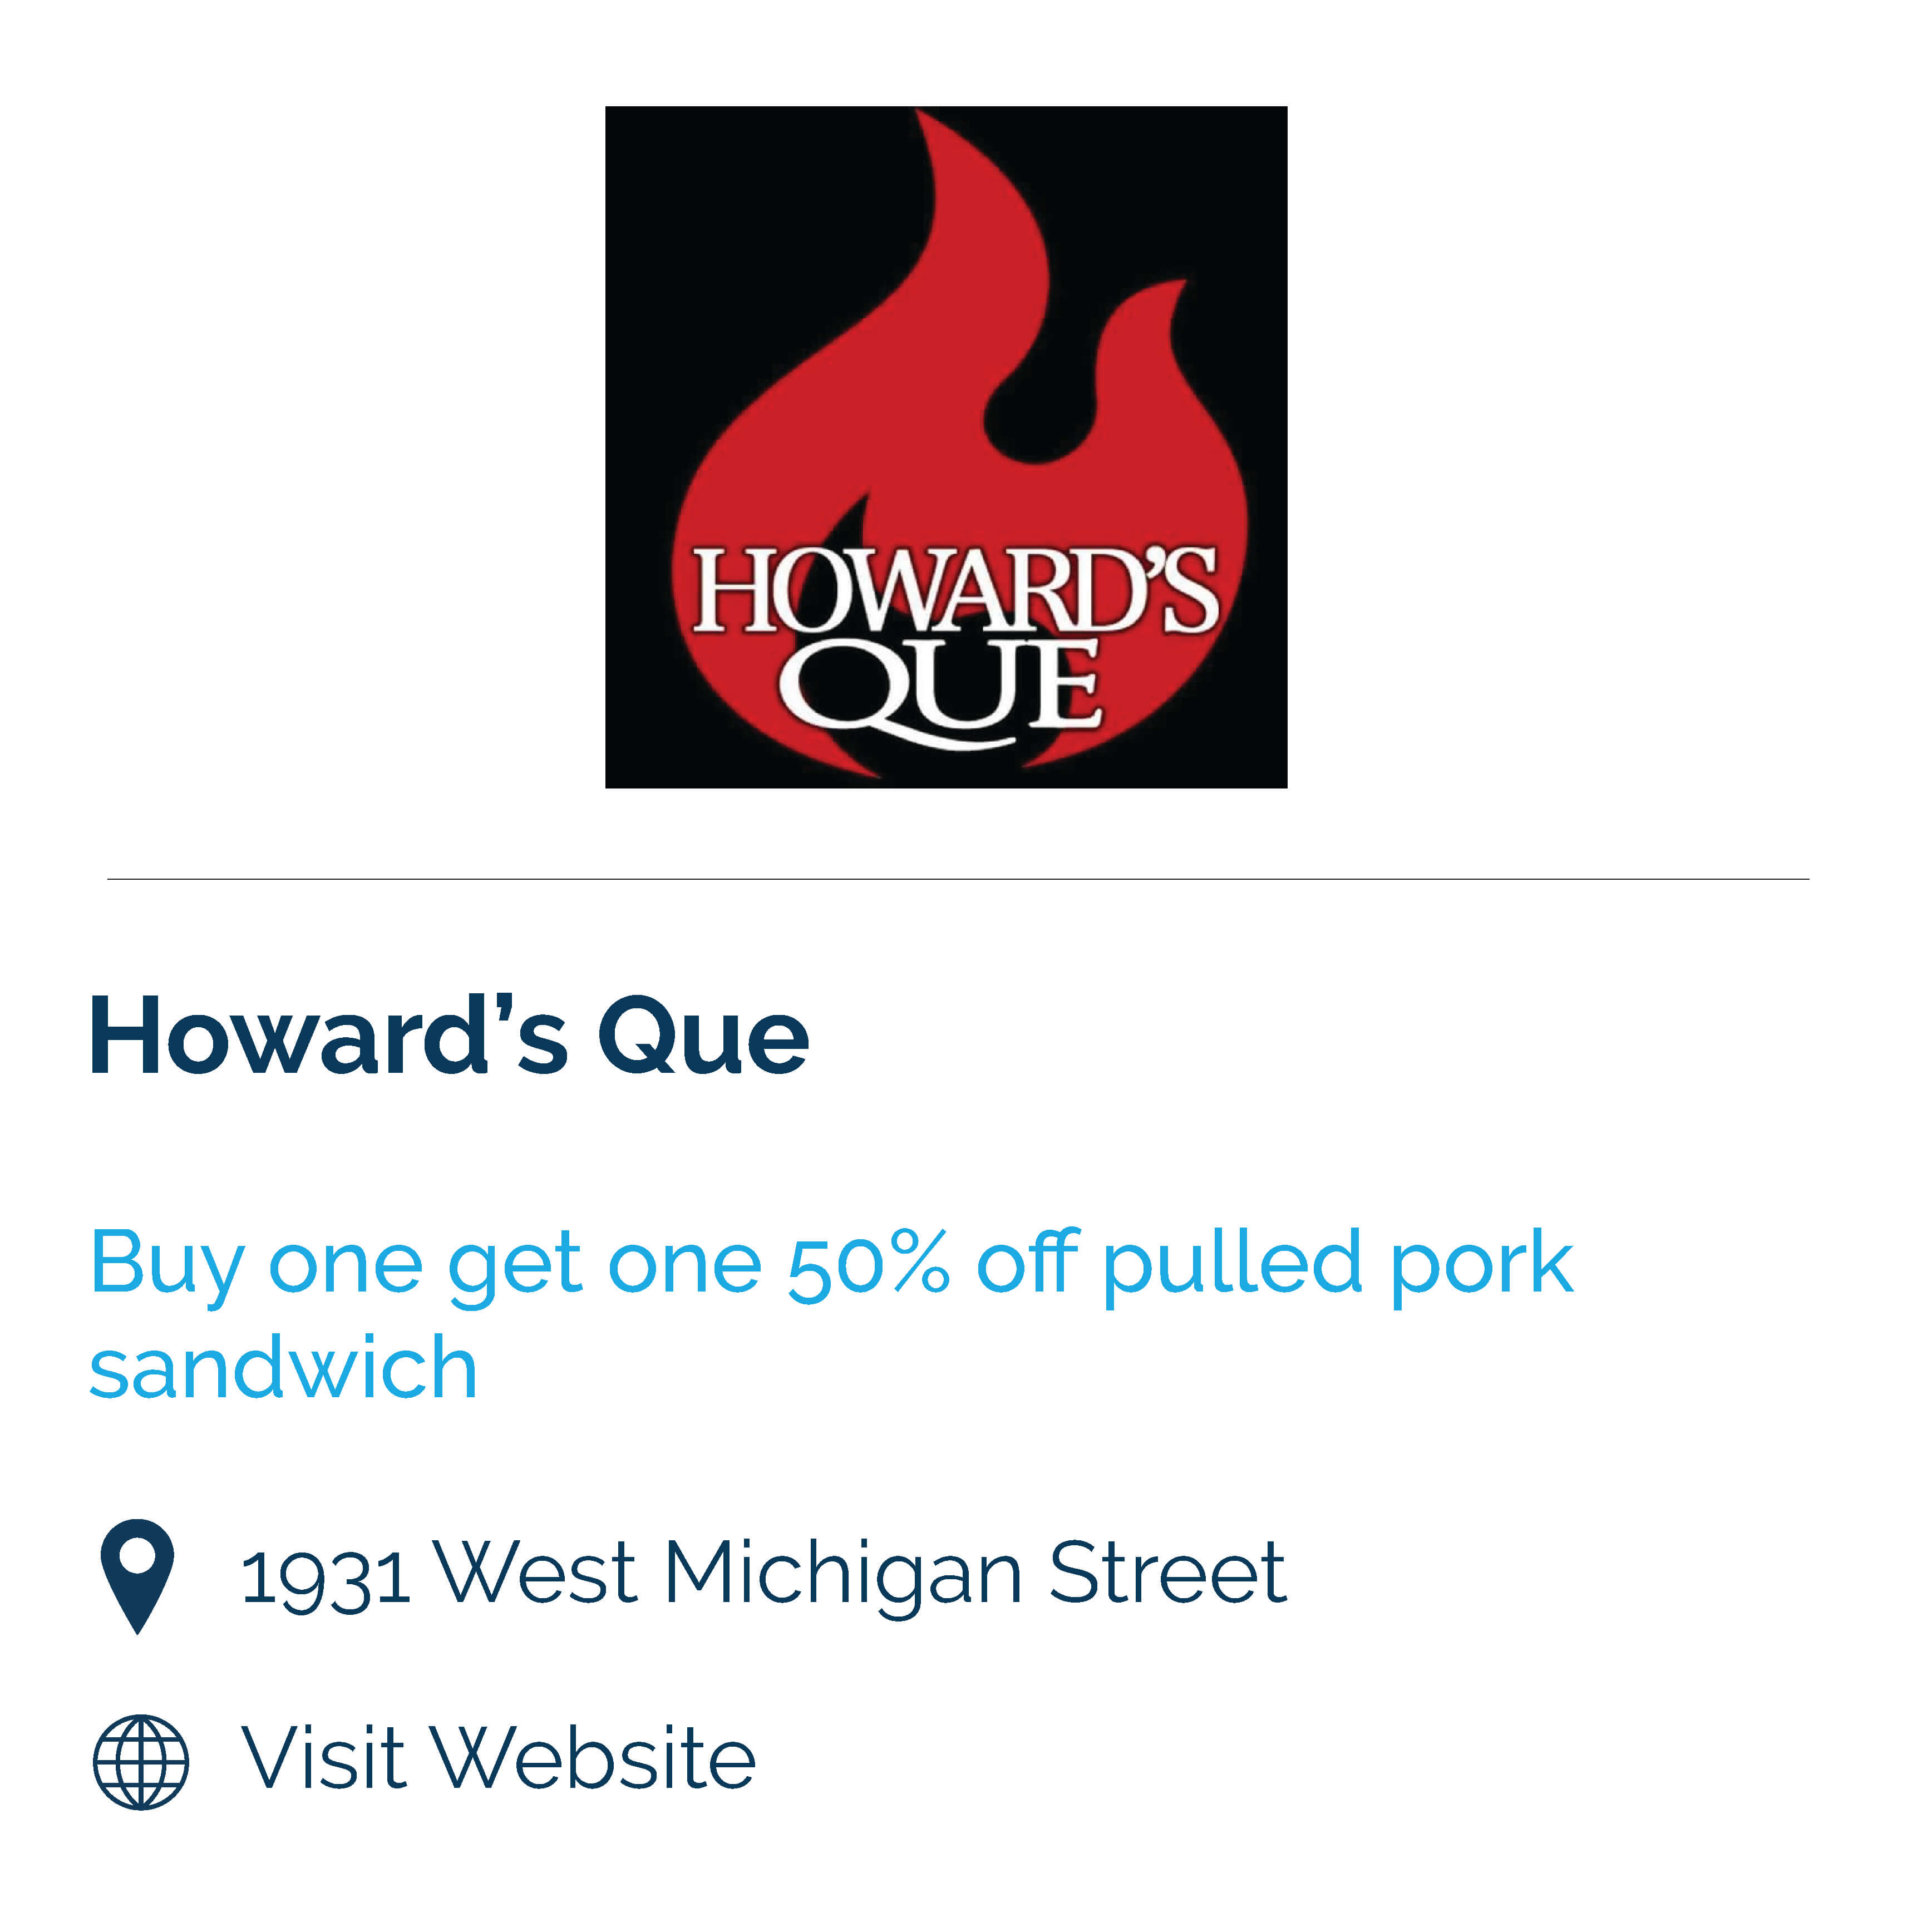 howard's que. buy one get one 50% off pulled pork sandwich. 1931 west michigan street